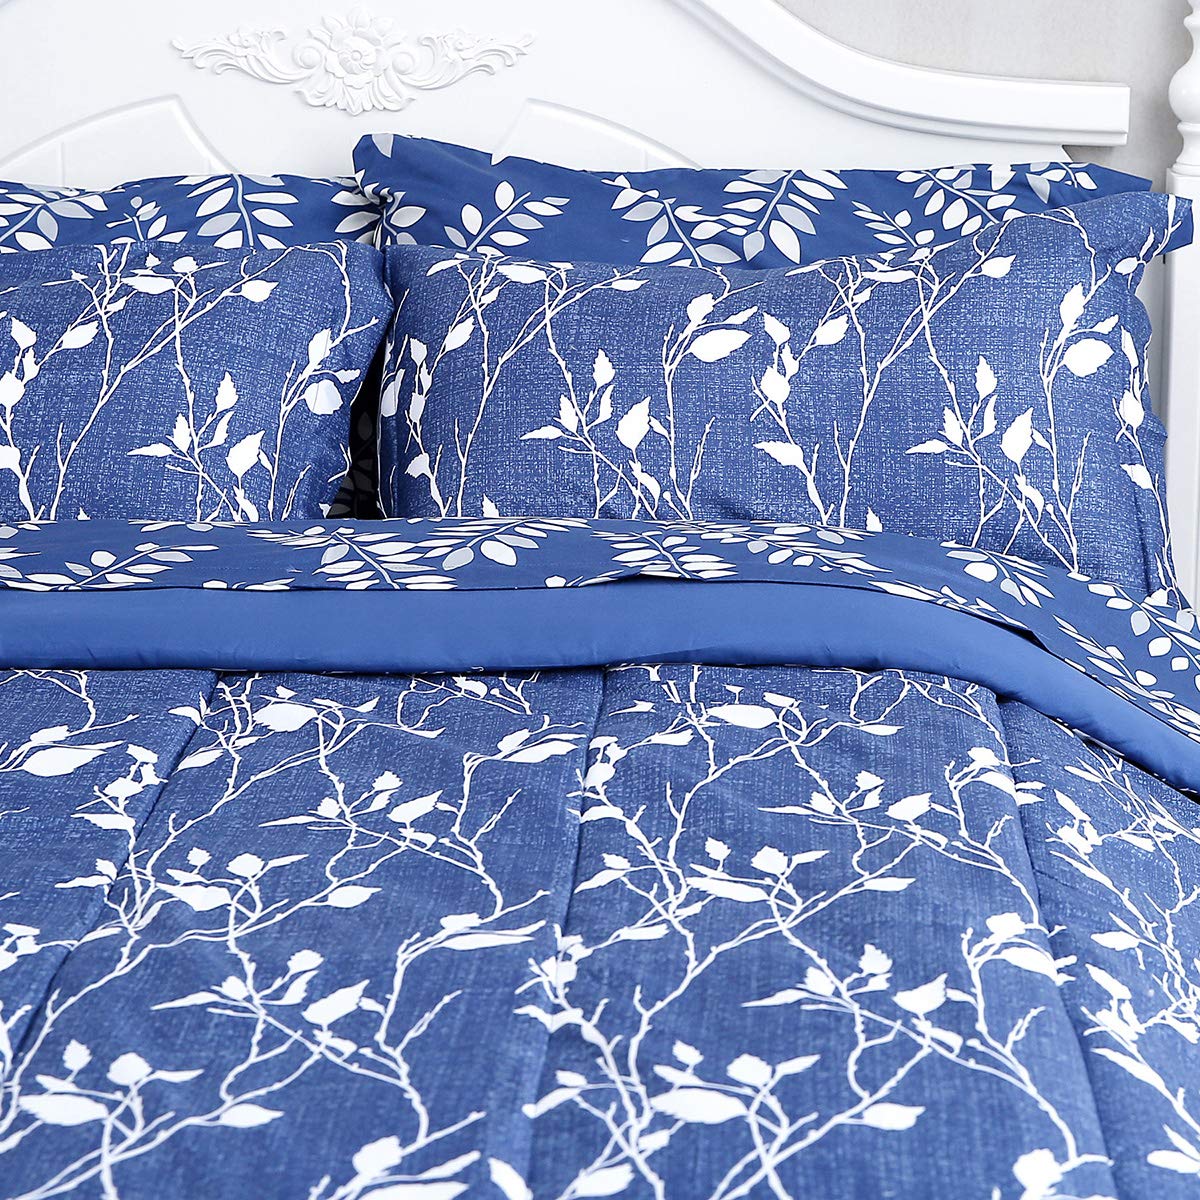 HONEYMOON - 6PC Comforter Set for Bedroom Guest Room - Twin, Blue with White Leaves